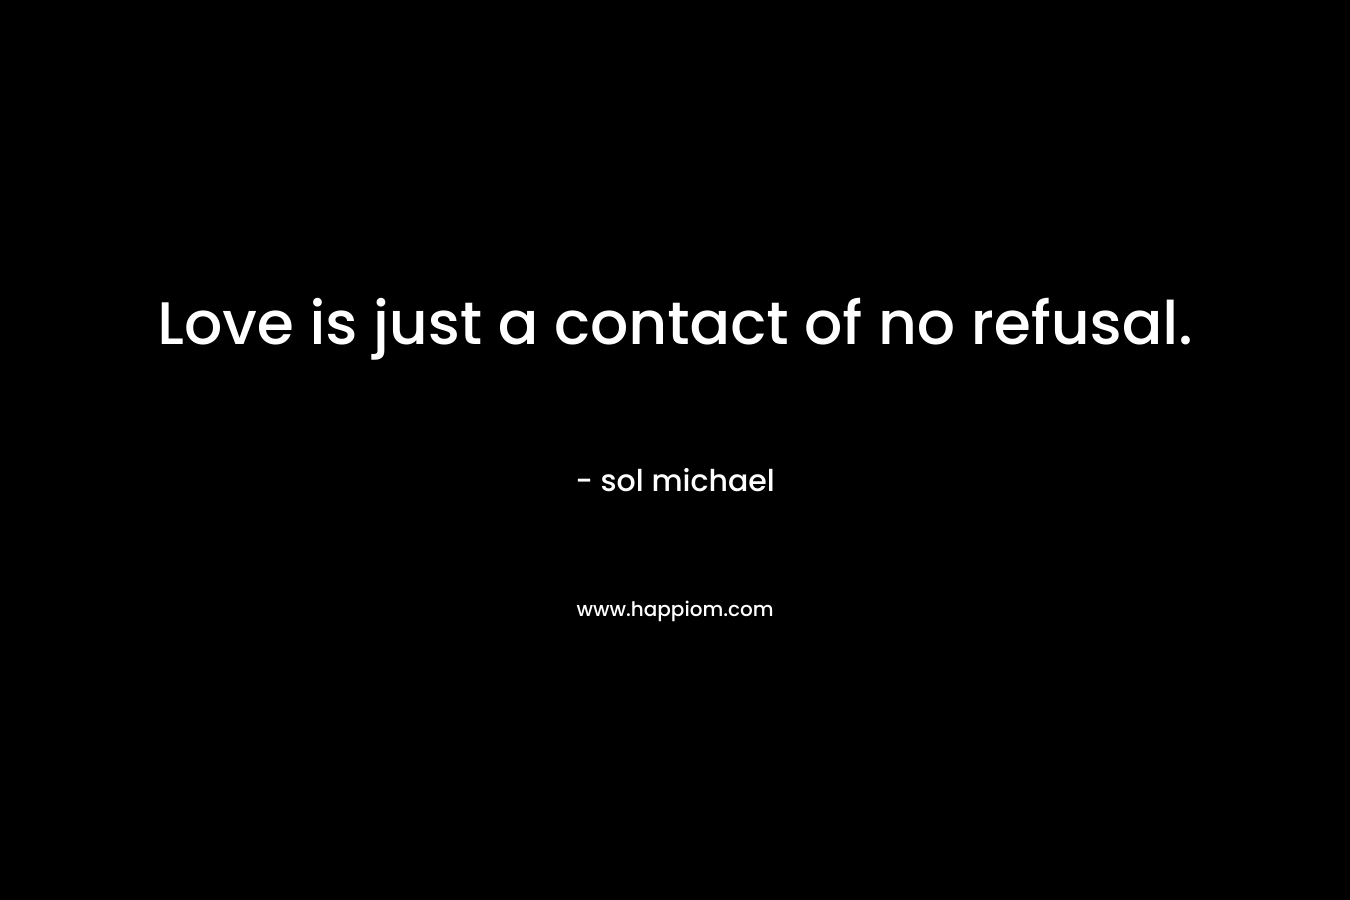 Love is just a contact of no refusal. – sol michael